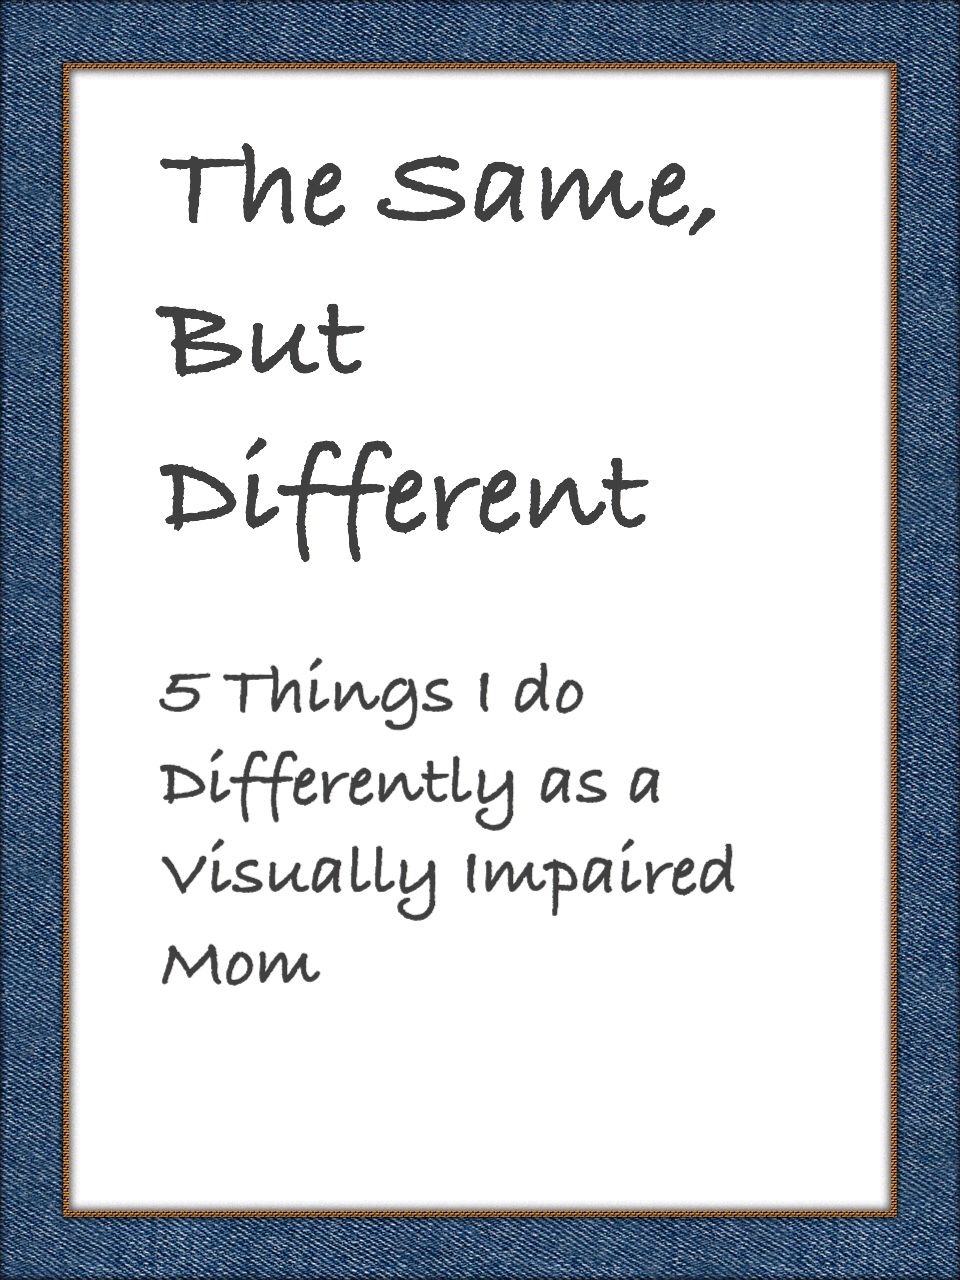 The Same, but Different photo frame pin